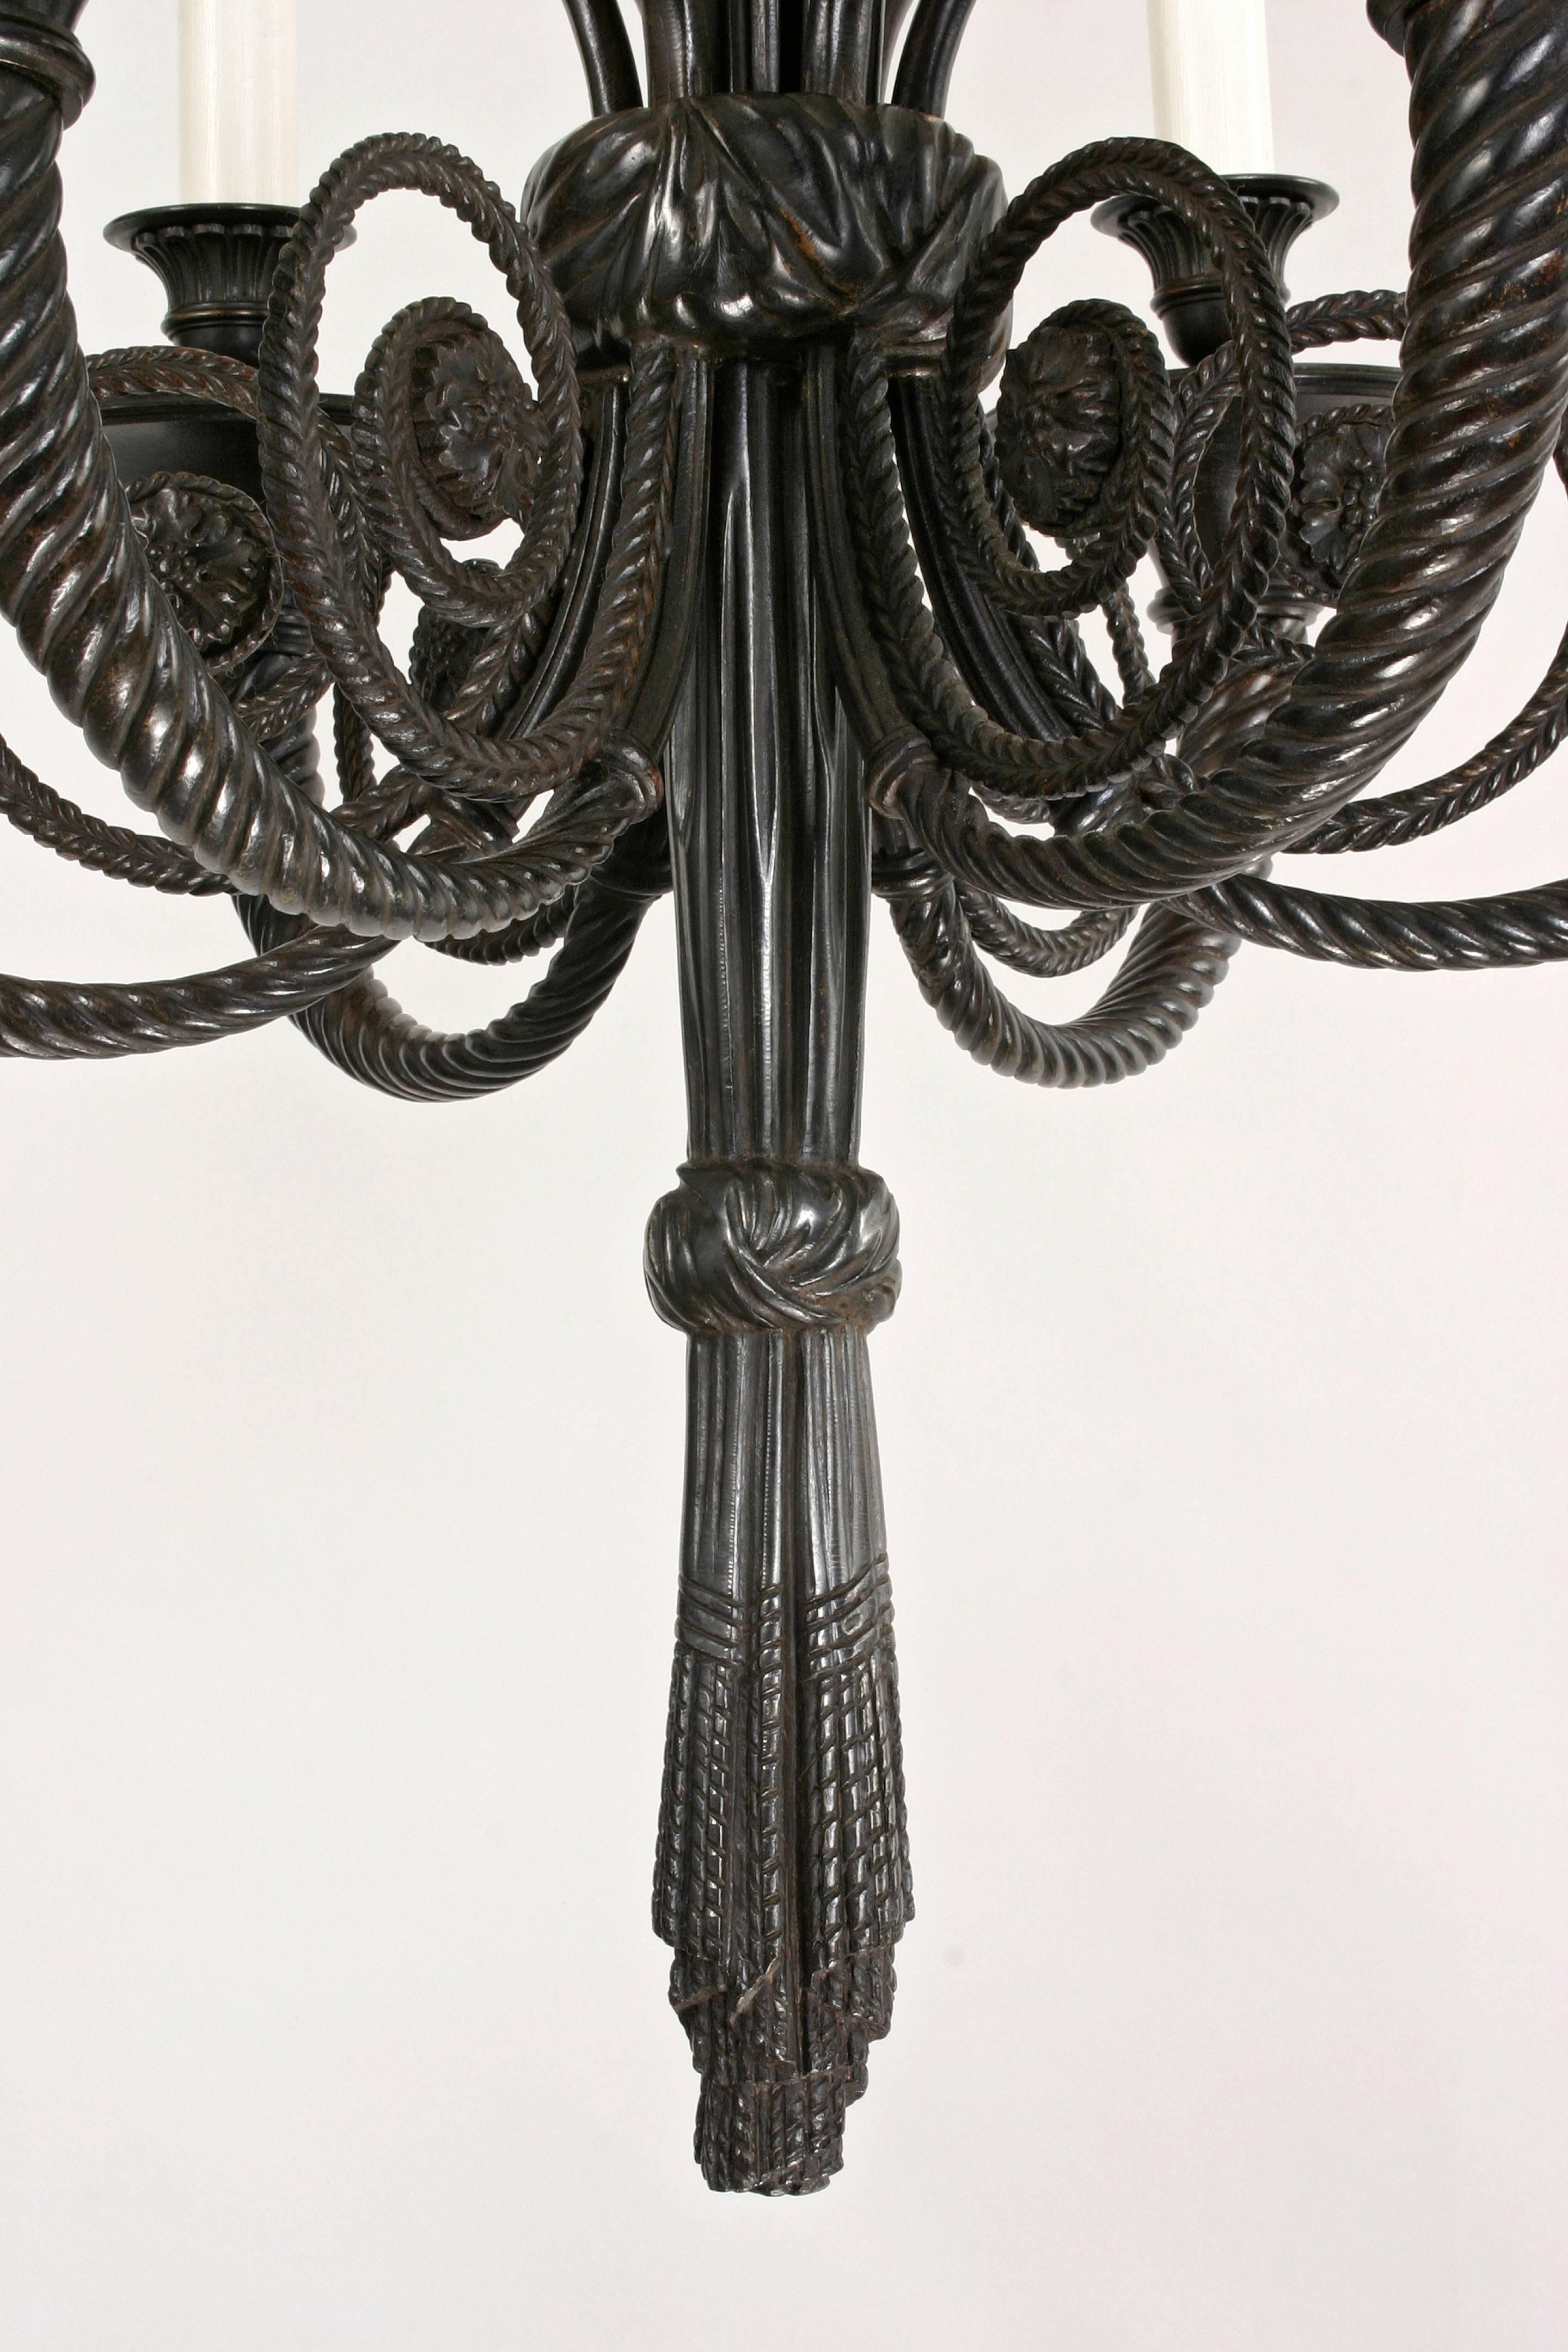 A beautifully designed and well cast bronze chandelier with a elegant patina. The tied ribbon cornona above a swag drapery stem issuing six spiraled trumpet-form arms, terminating with a tied drapery finial. 

In great condition, a good looking